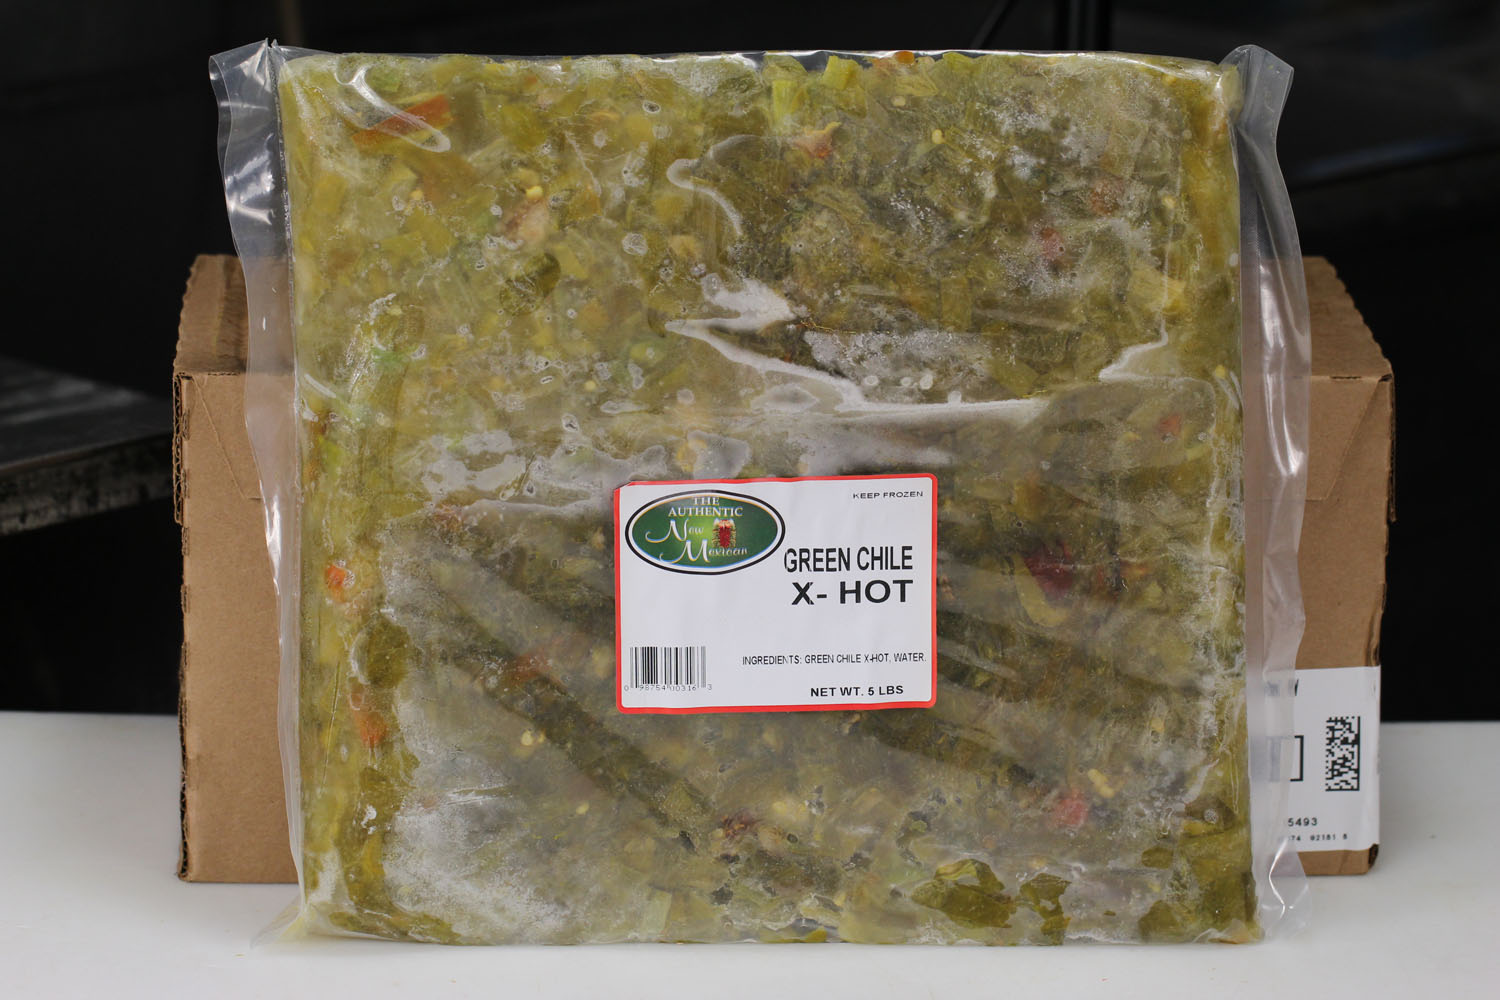 This image icon displays the Purdy's Quality Meats New Mexico Green Chili Extra Hot 5lbs image